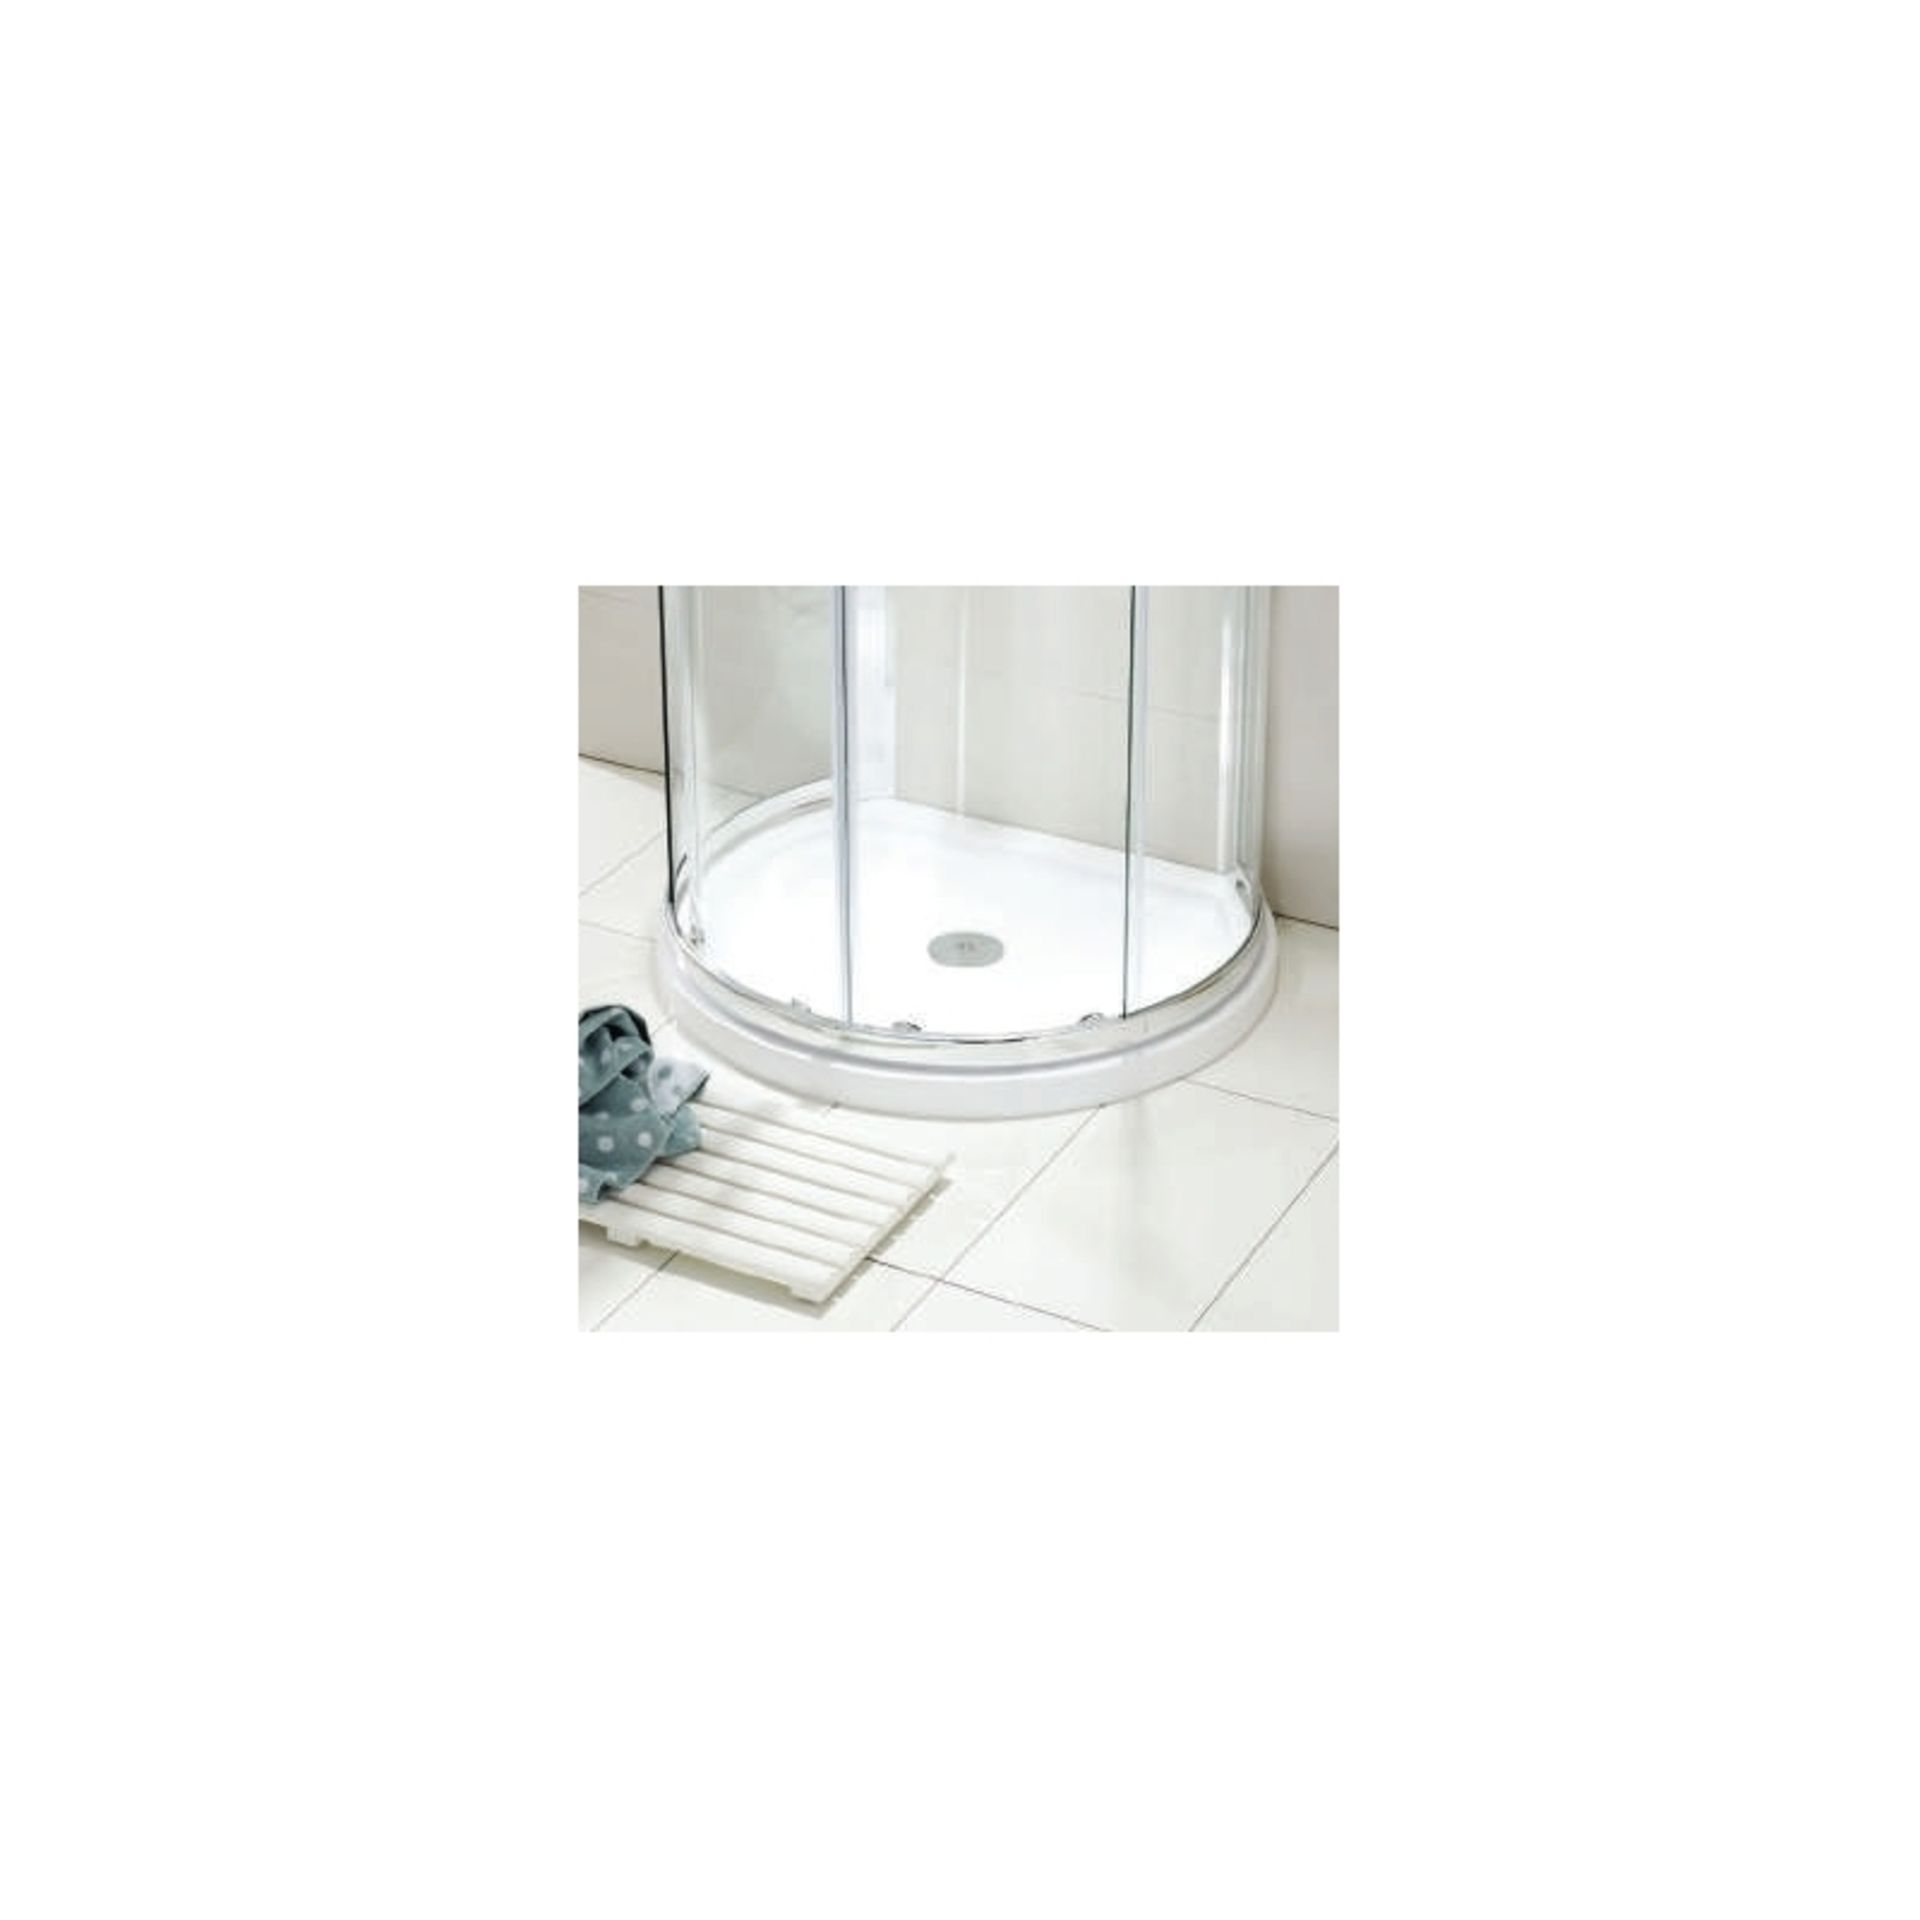 NEW (PC41) Twyfords 770mm Hydro D Shape White Shower tray.Low profile ultra slim design Gel coa... - Image 2 of 3